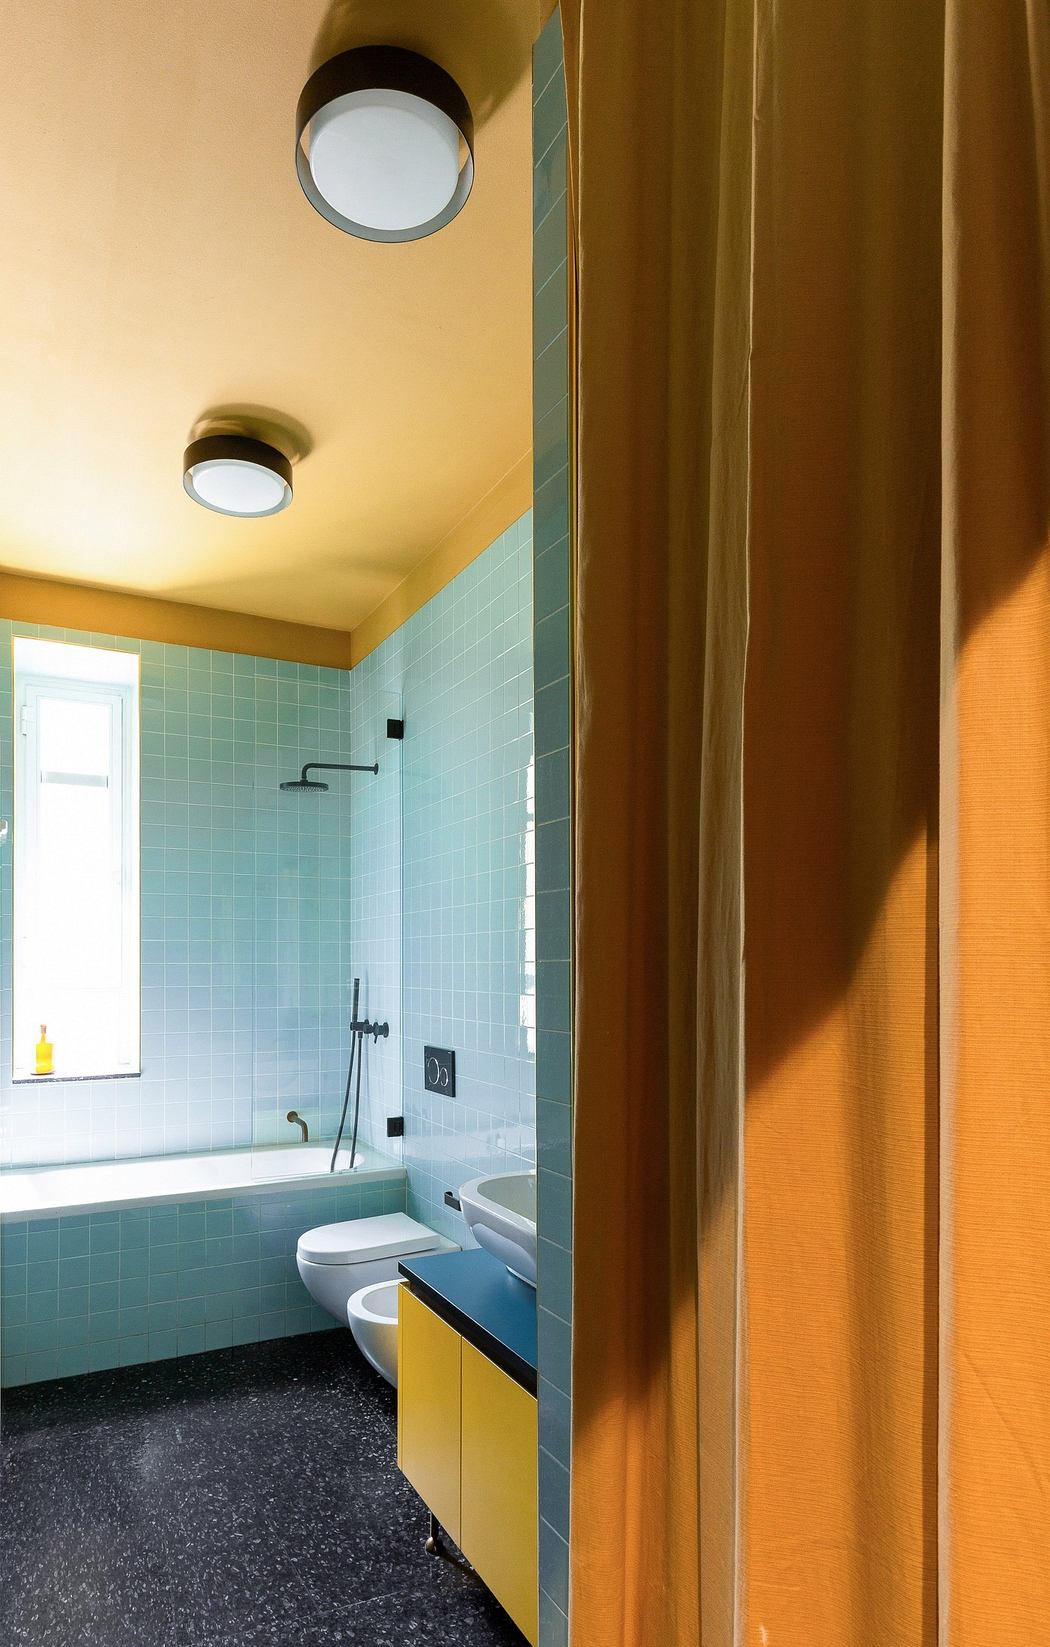 Colorful bathroom with blue tiles, yellow walls, and retro fixtures.